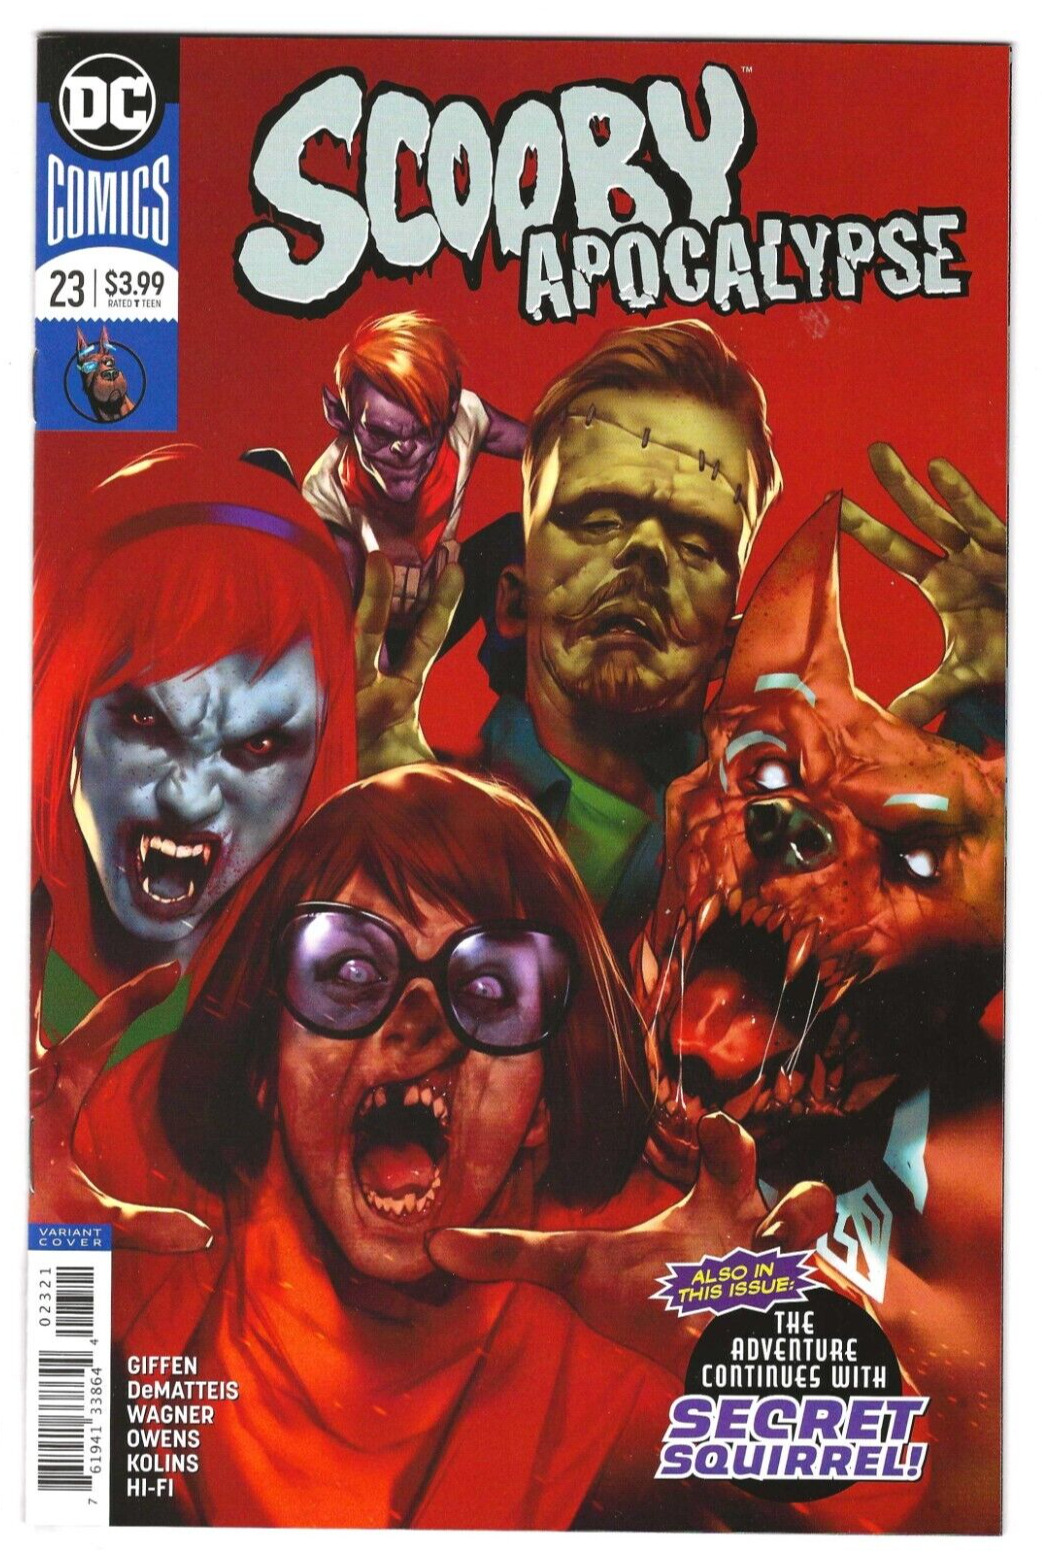 DC Comics SCOOBY APOCALYPSE #23 first printing cover B